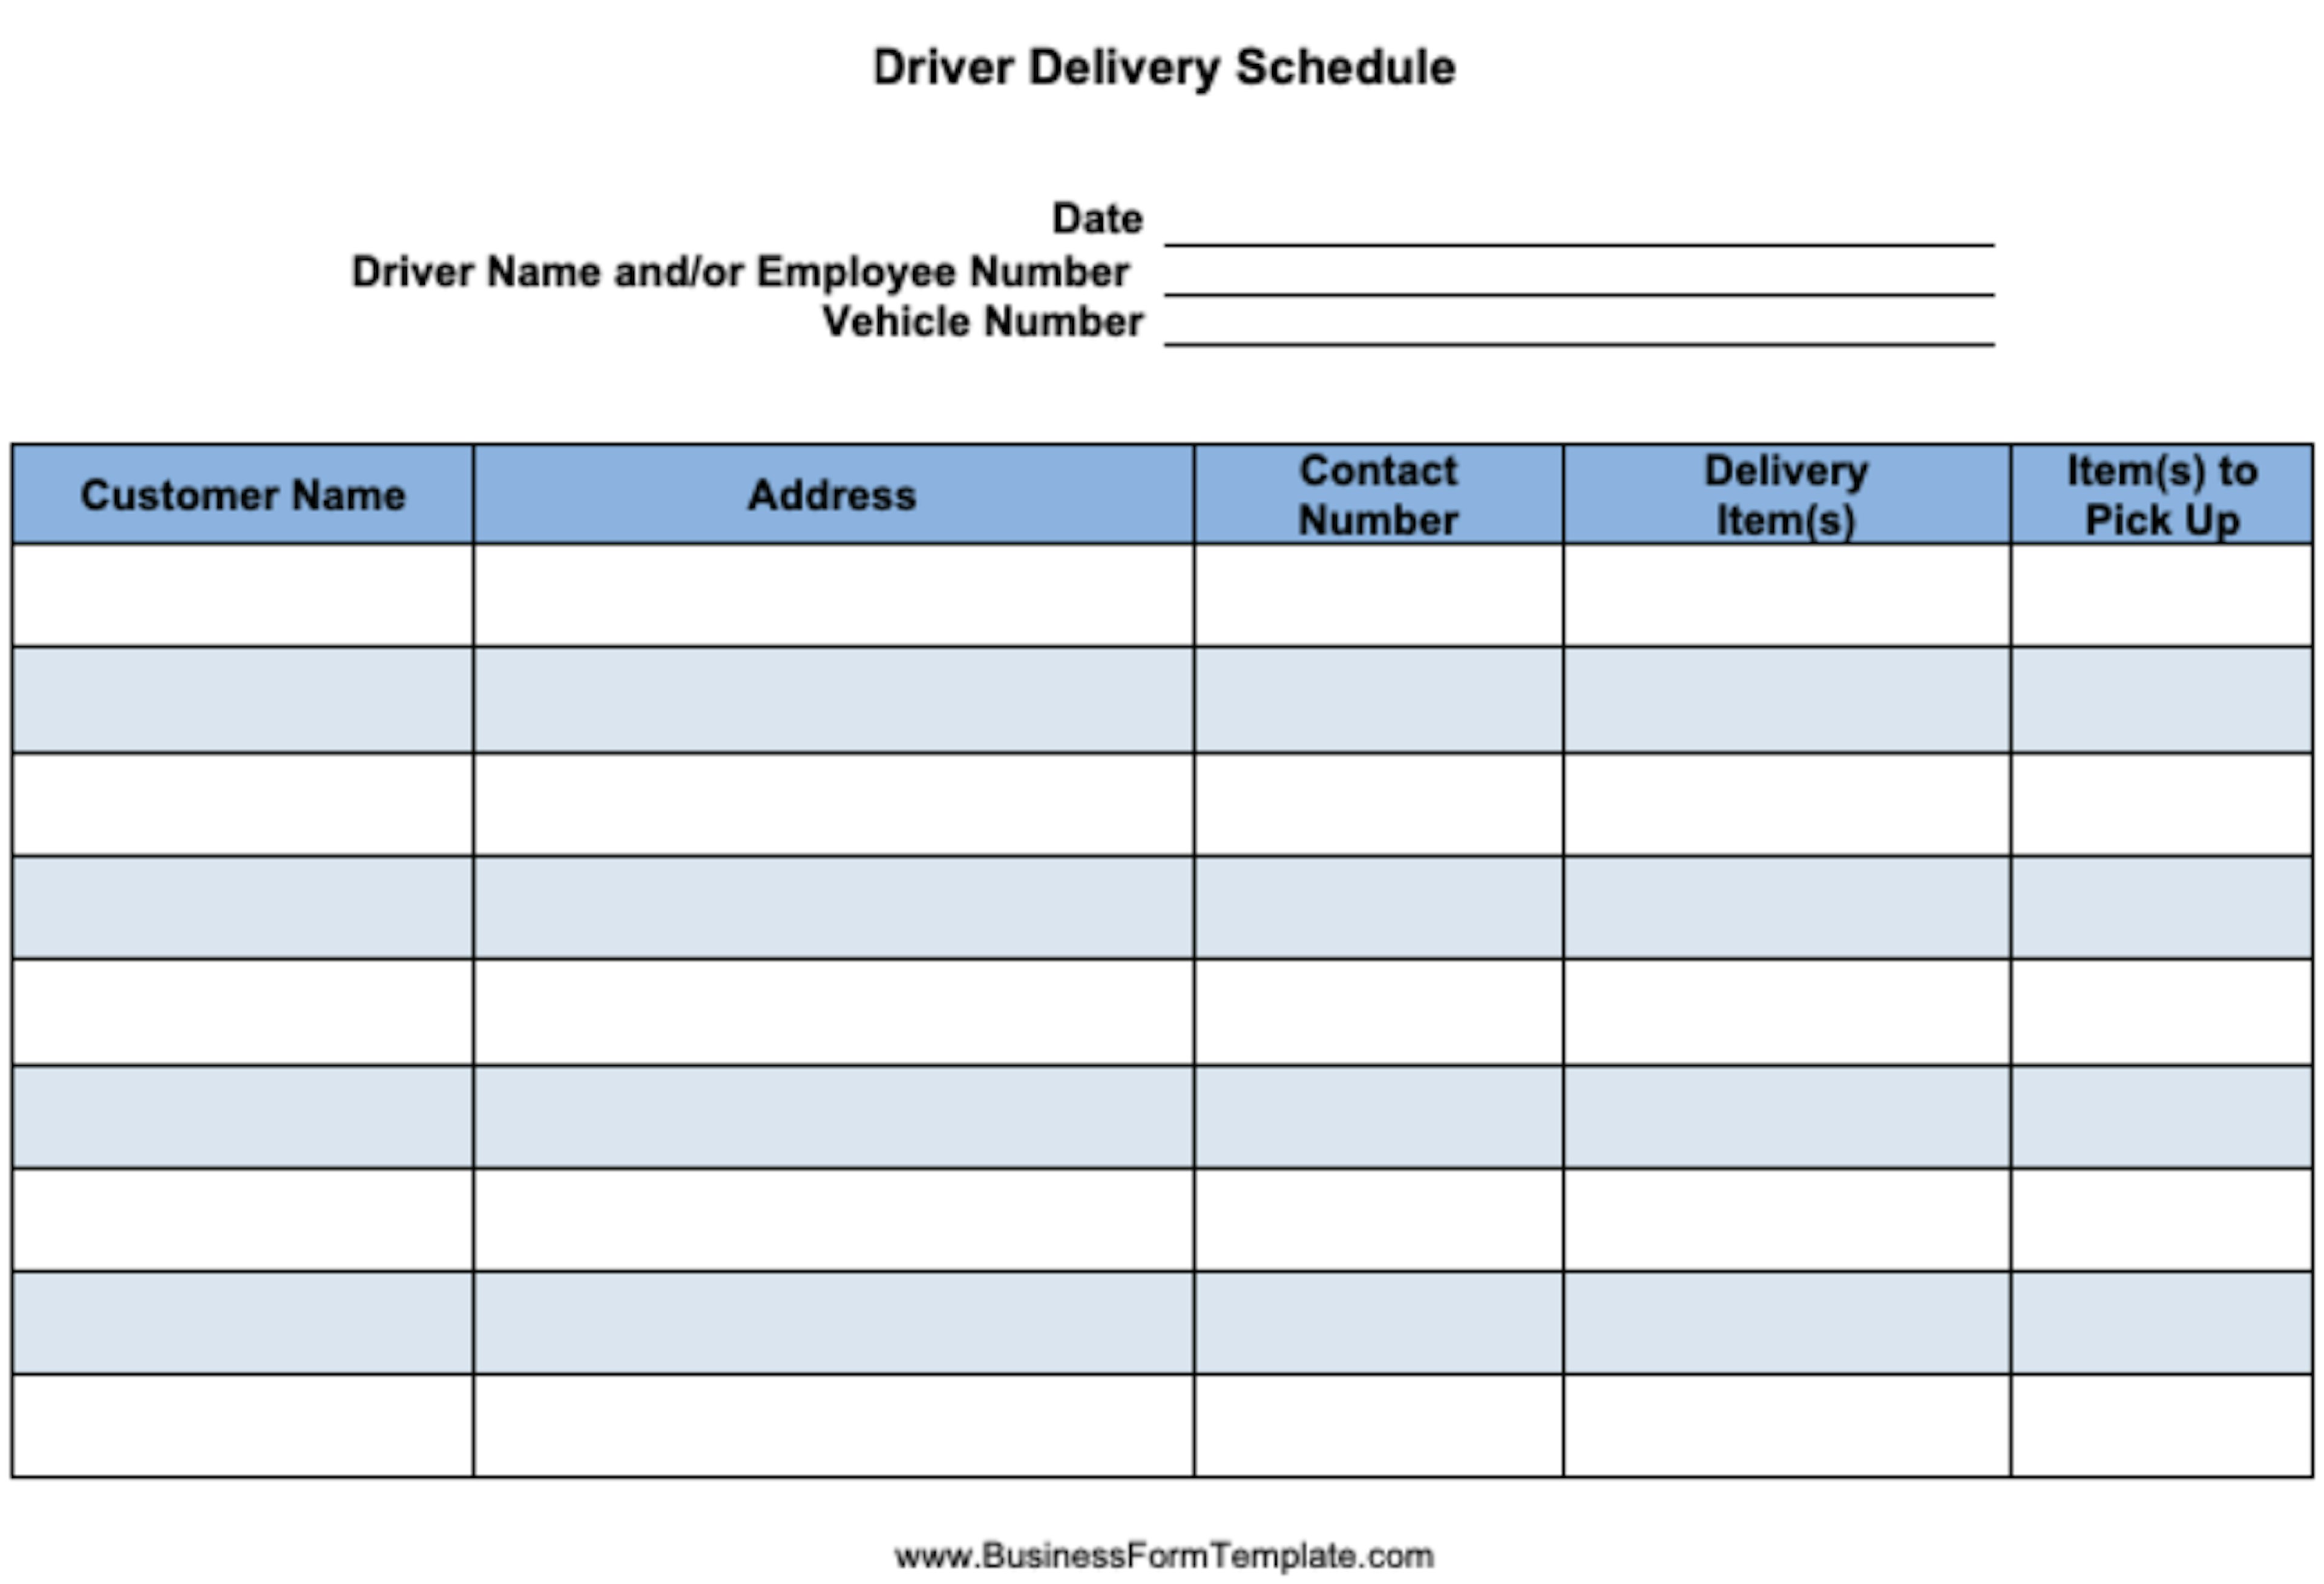 Driver delivery schedule form with fields for customer info, delivery items, and driver details